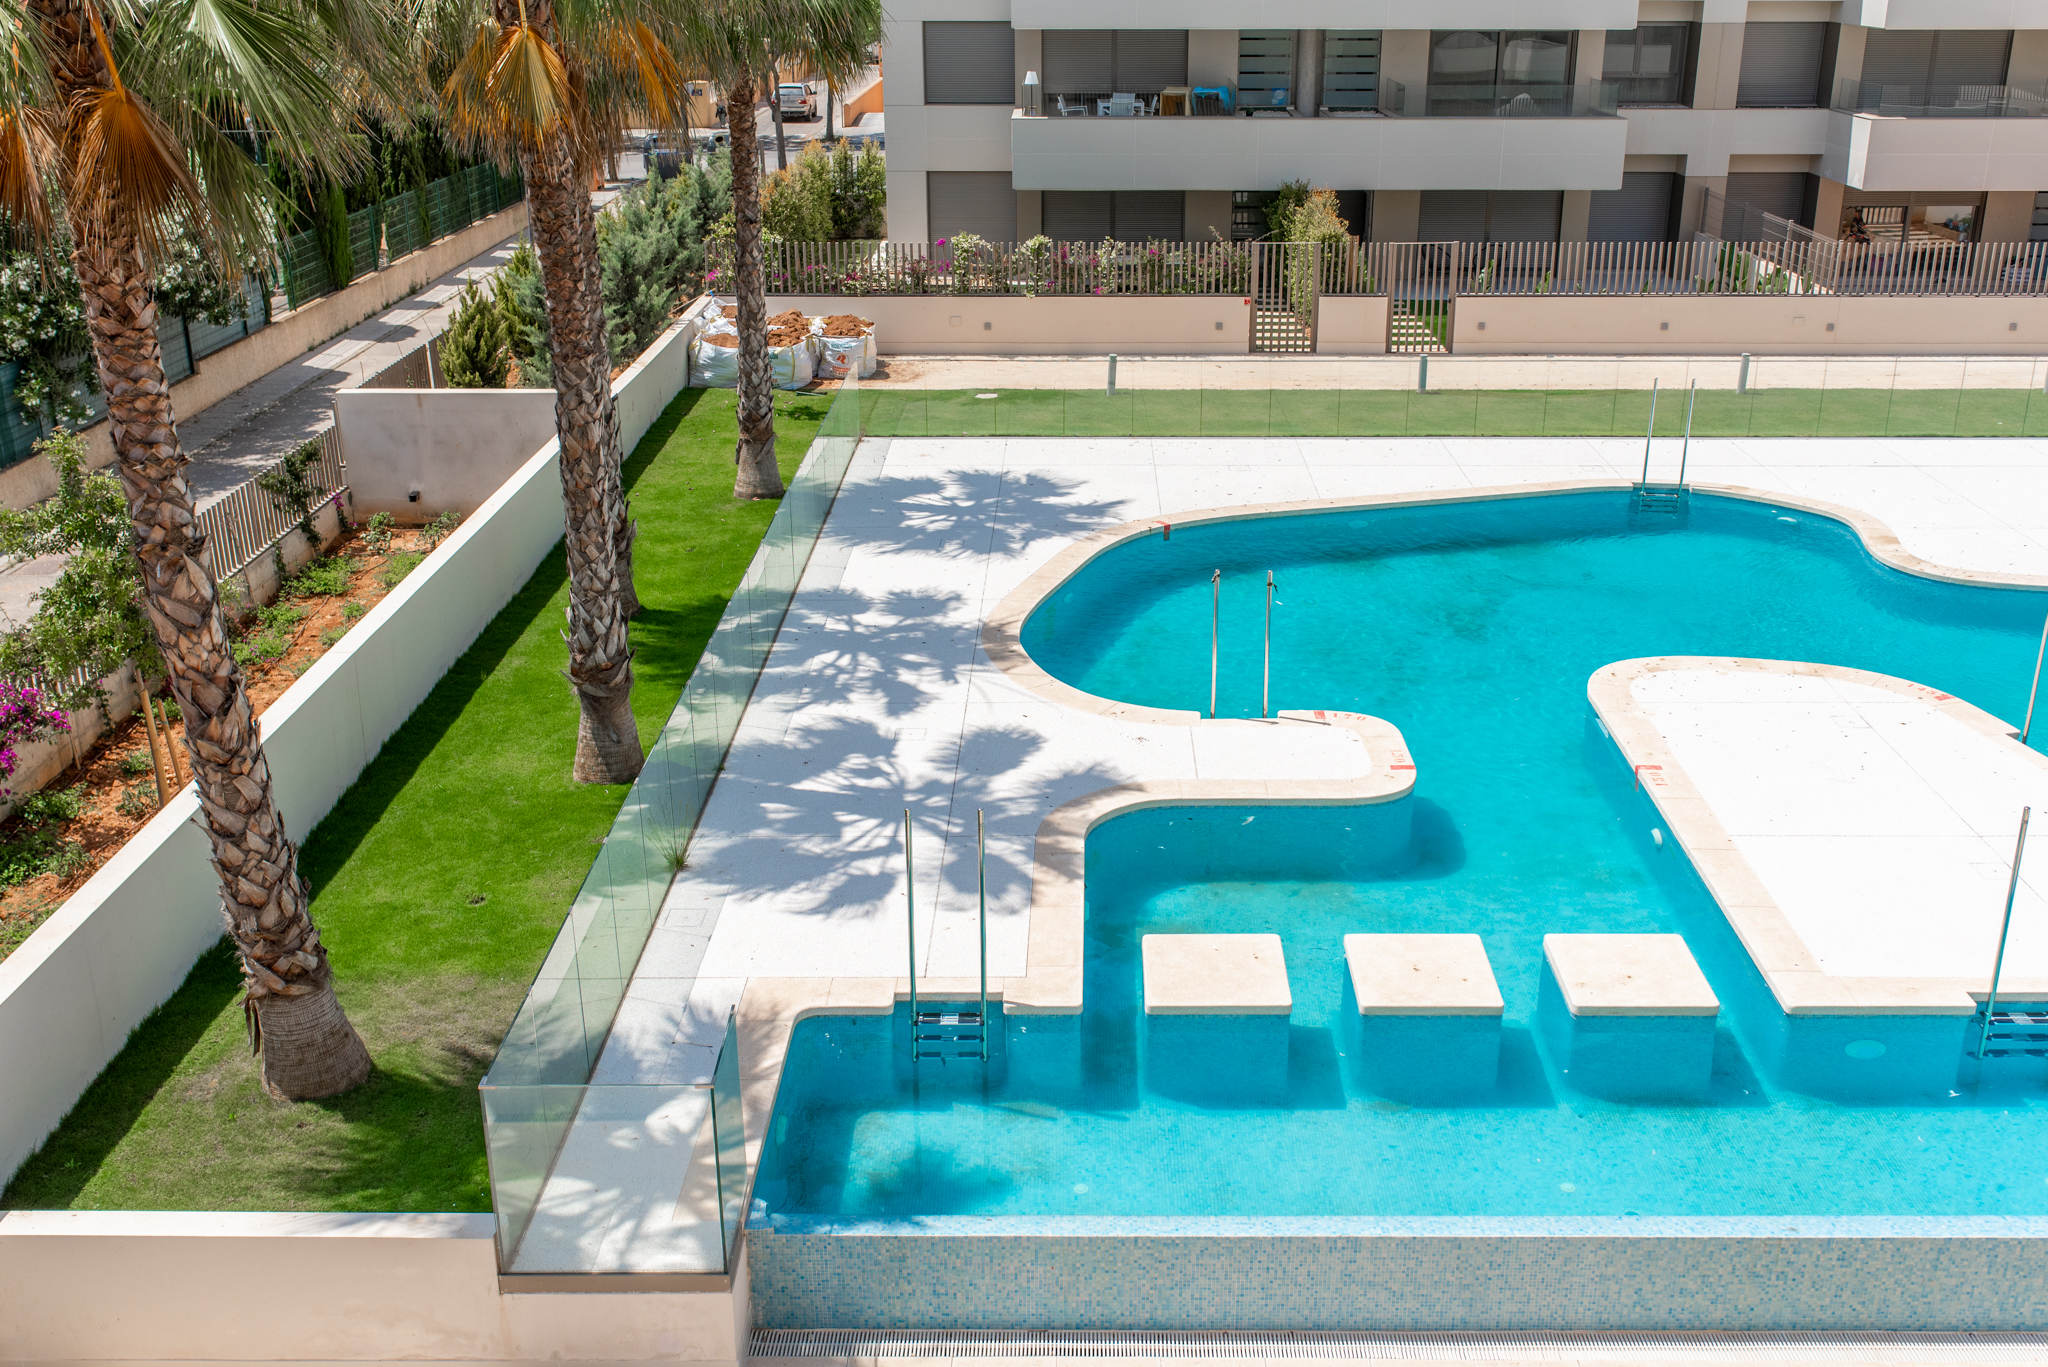 4-Bed Apartment on the 2nd Floor in Can Misses, Ibiza